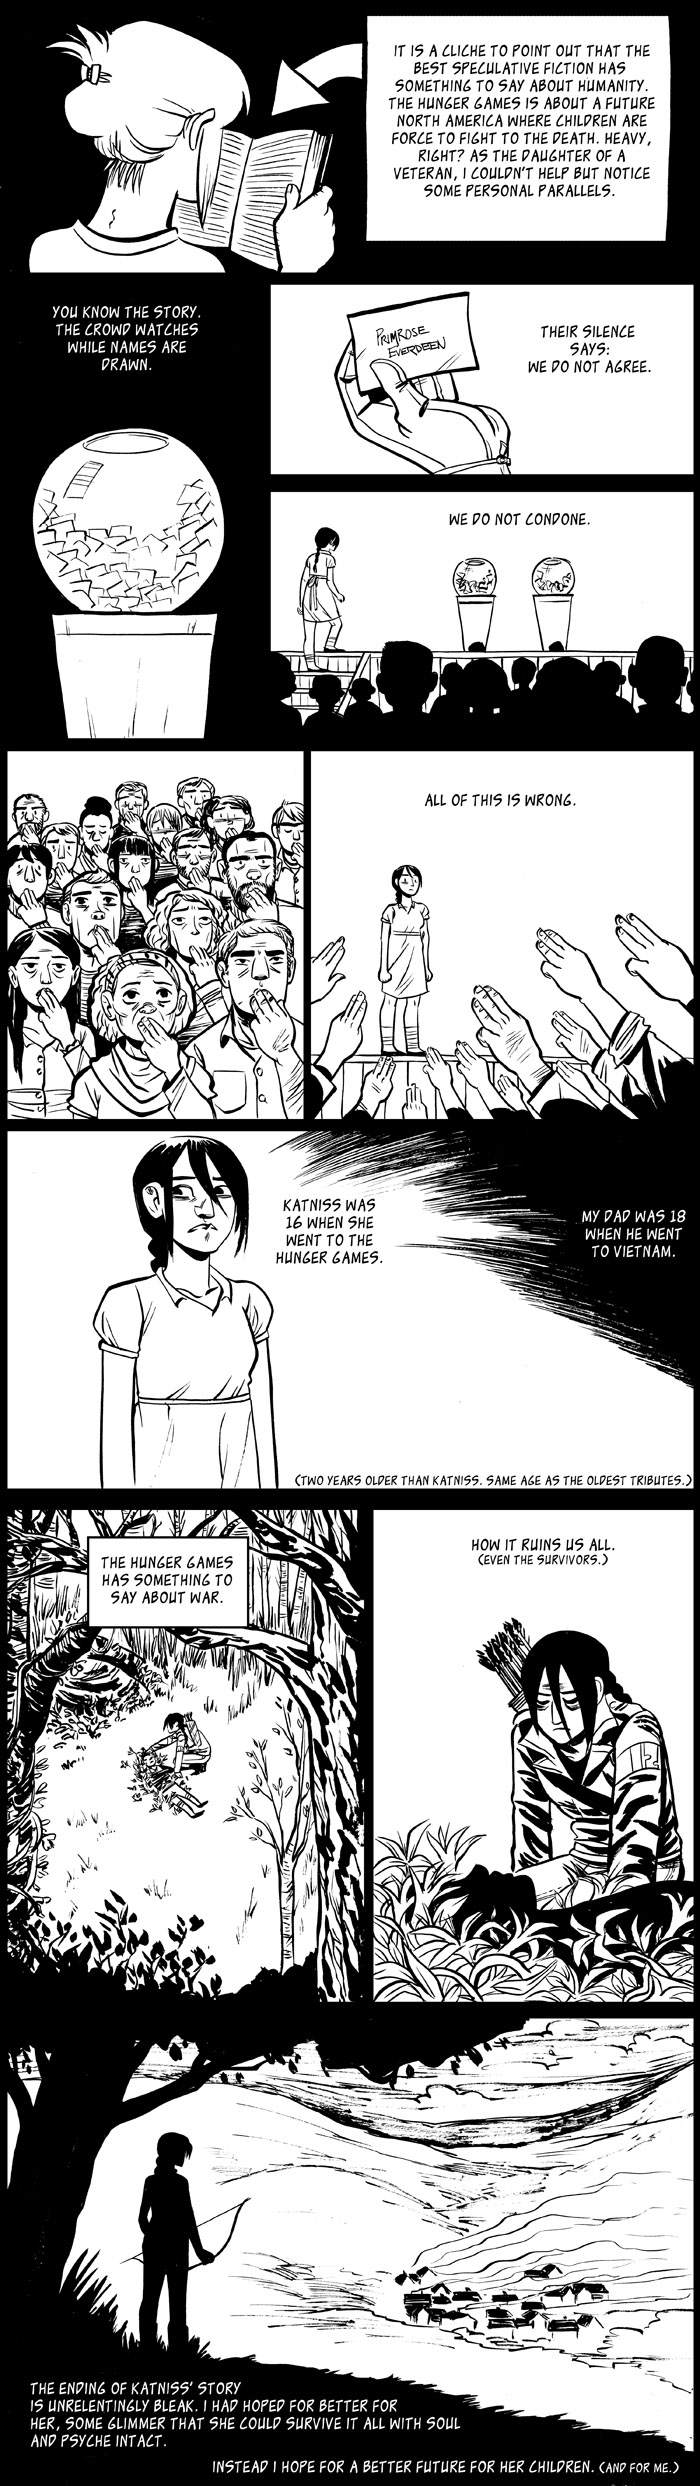 The Hunger Games comic by Faith Erin Hicks